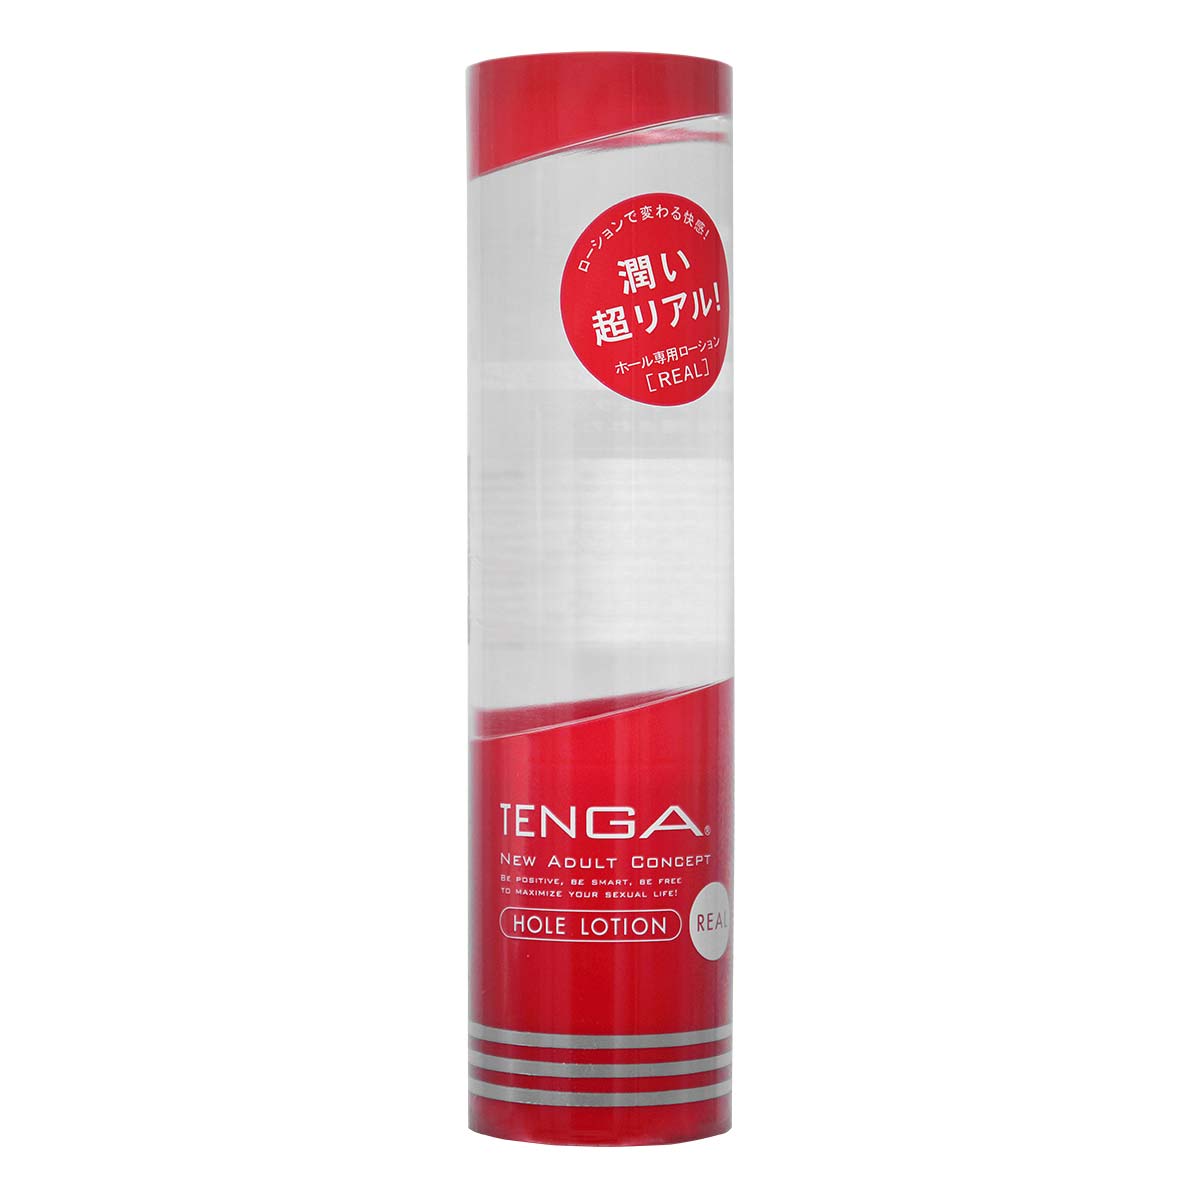 TENGA HOLE LOTION REAL 170ml Water-based Lubricant-p_2